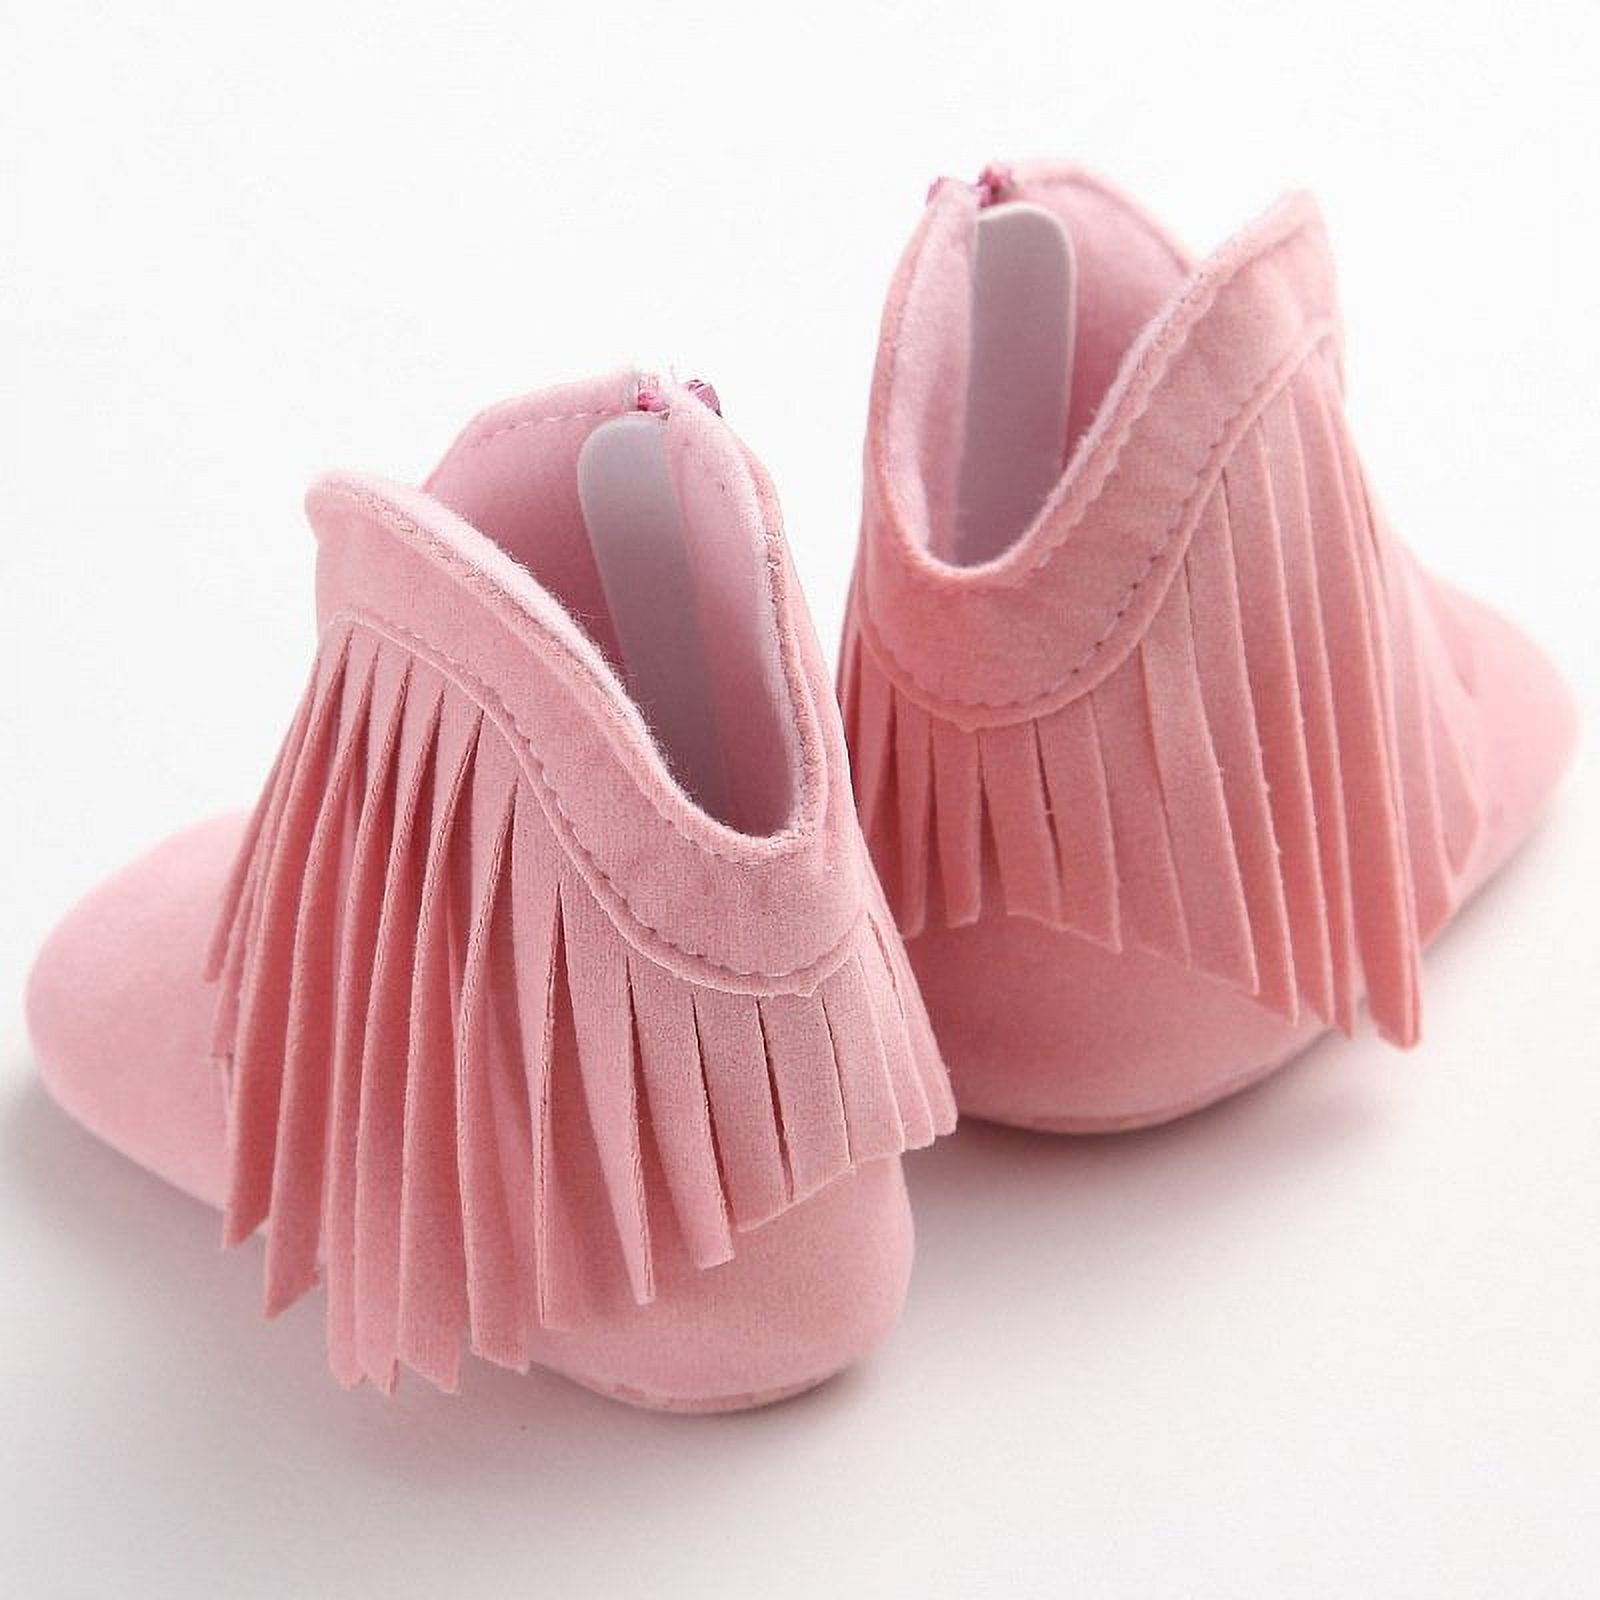 Newborn Toddler Tassel Boots Baby Infant Boy Girl Soft Soled Winter Shoes - image 5 of 6